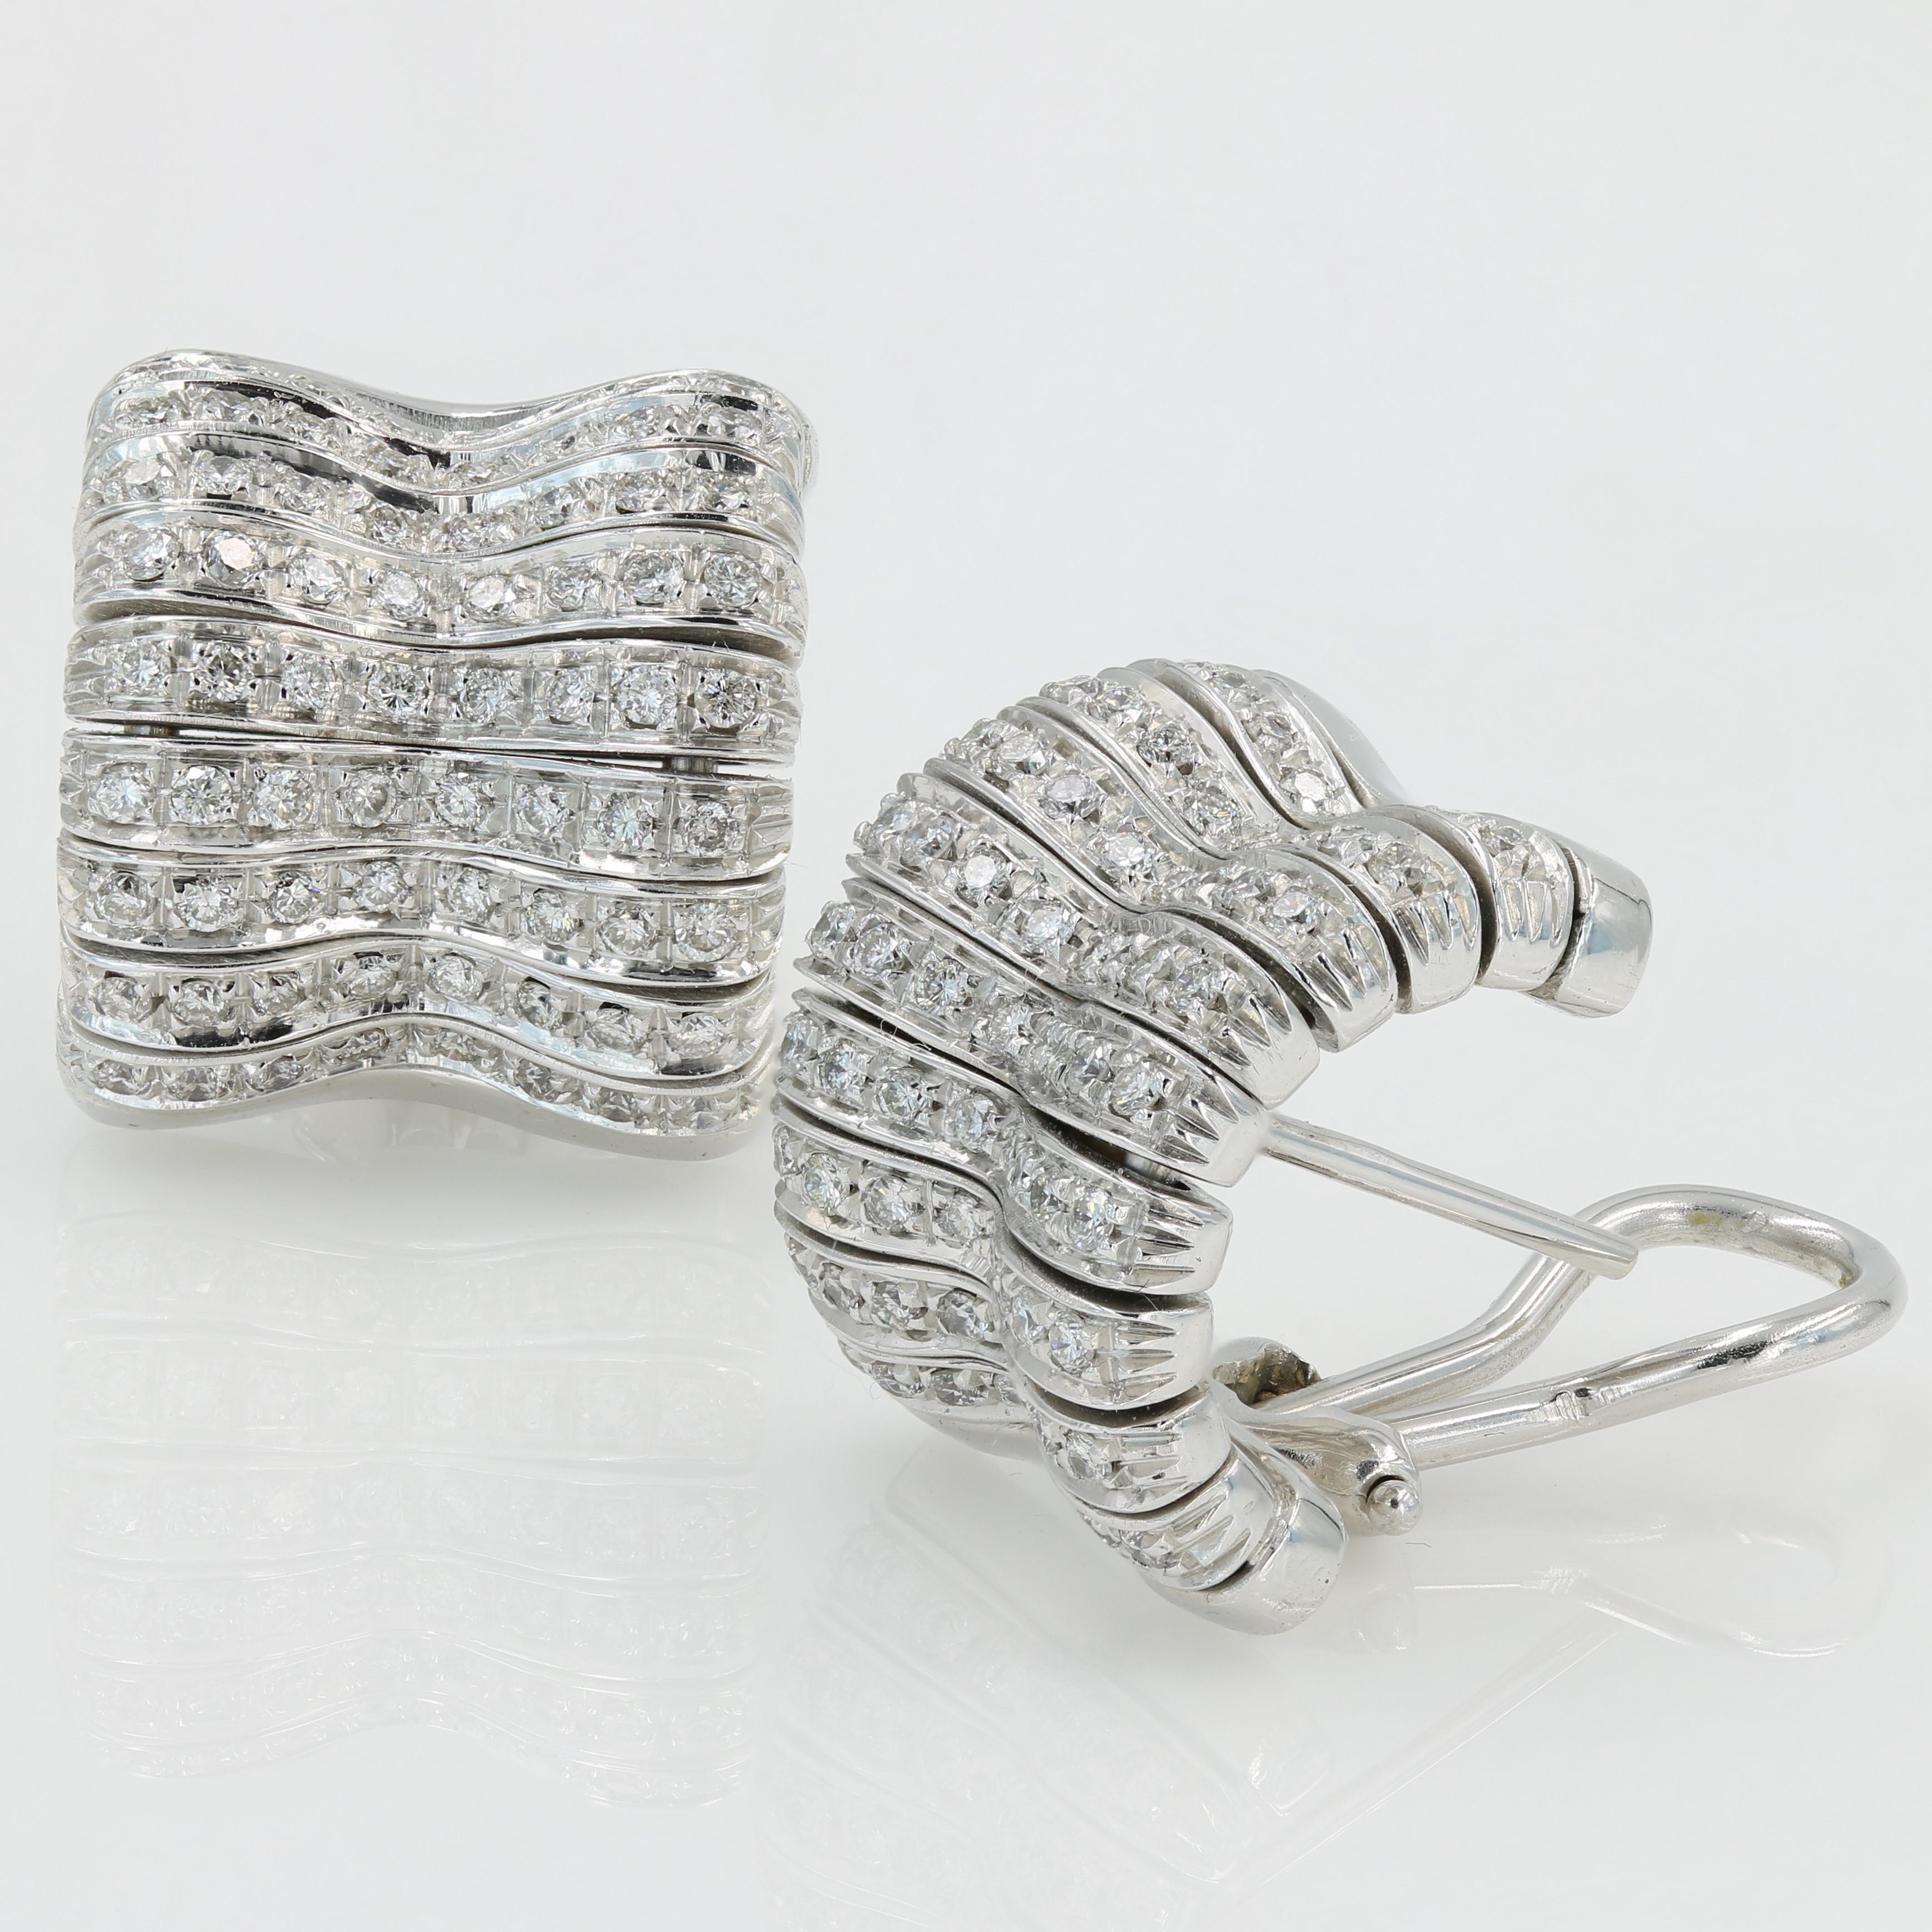 Contemporary Orlandini 18 Karat White Gold and Diamond Earrings with Approximately 1.00 Carat